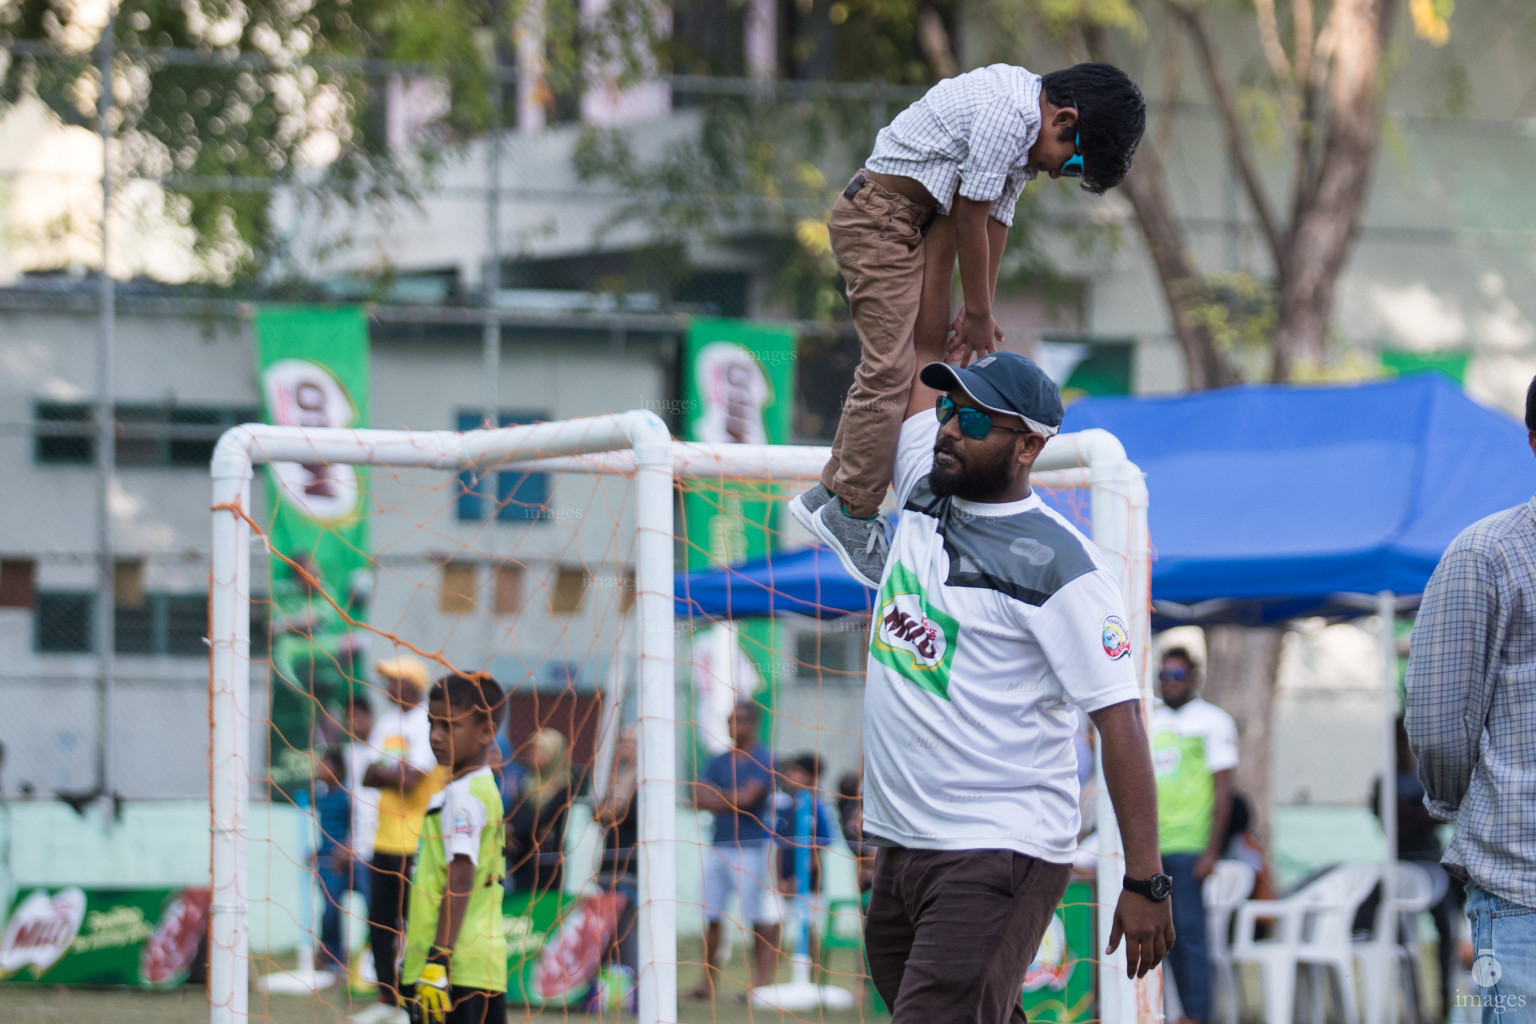 Day 3 of MILO Kids Football Fiesta in Henveiru Grounds in Male', Maldives, Friday, February 22nd 2019 (Images.mv Photo / Suadh Abdul Sattar)